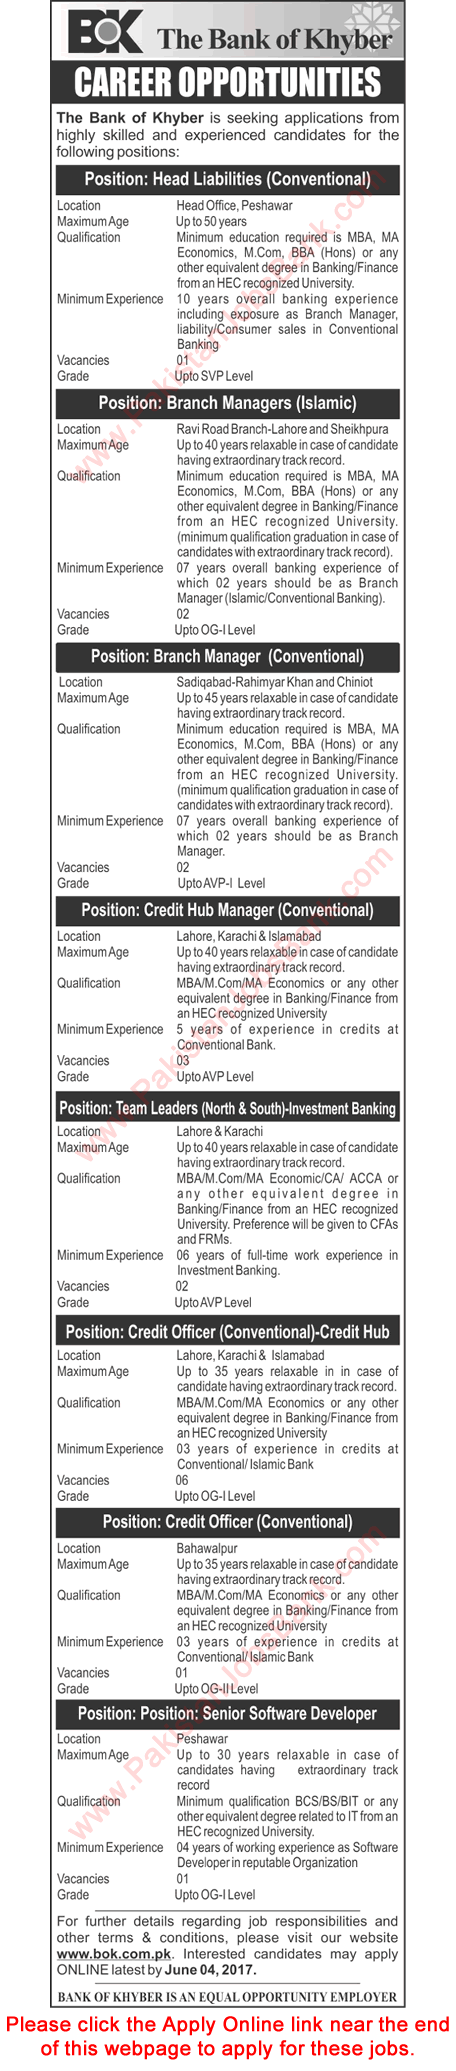 Bank of Khyber Jobs May 2017 Apply Online BOK Credit Officers, Team Leaders & Others Latest